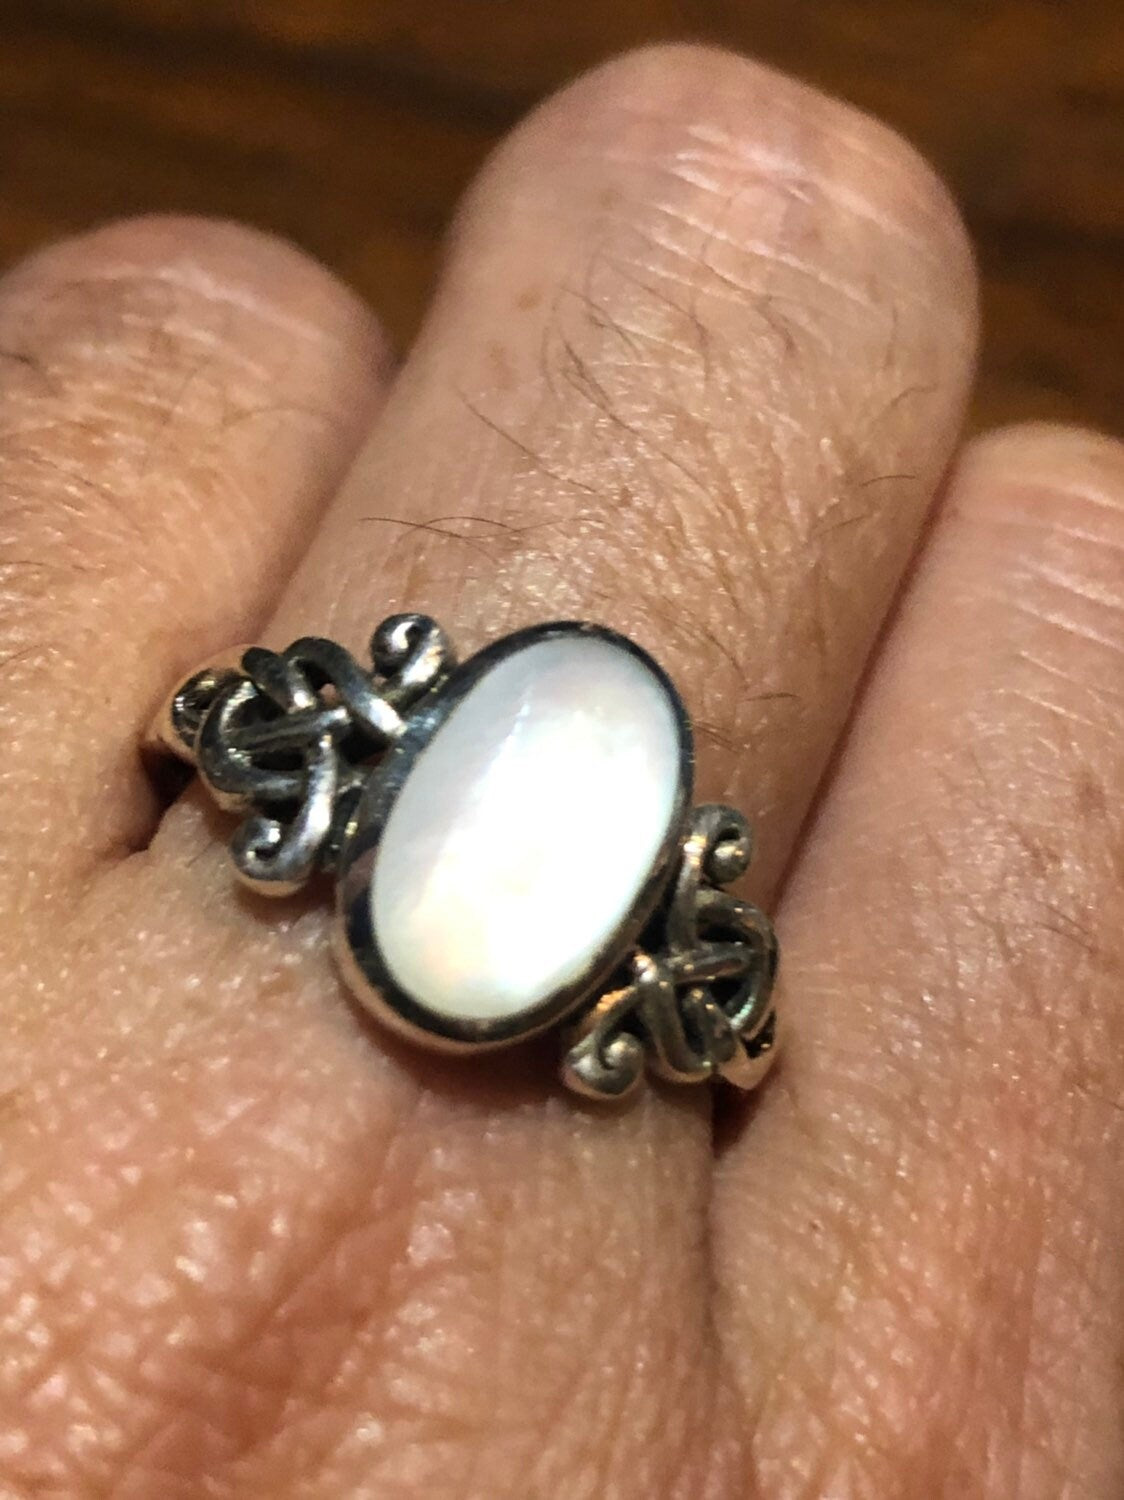 Antique White Mother of Pearl Filigree Sterling Silver Ring